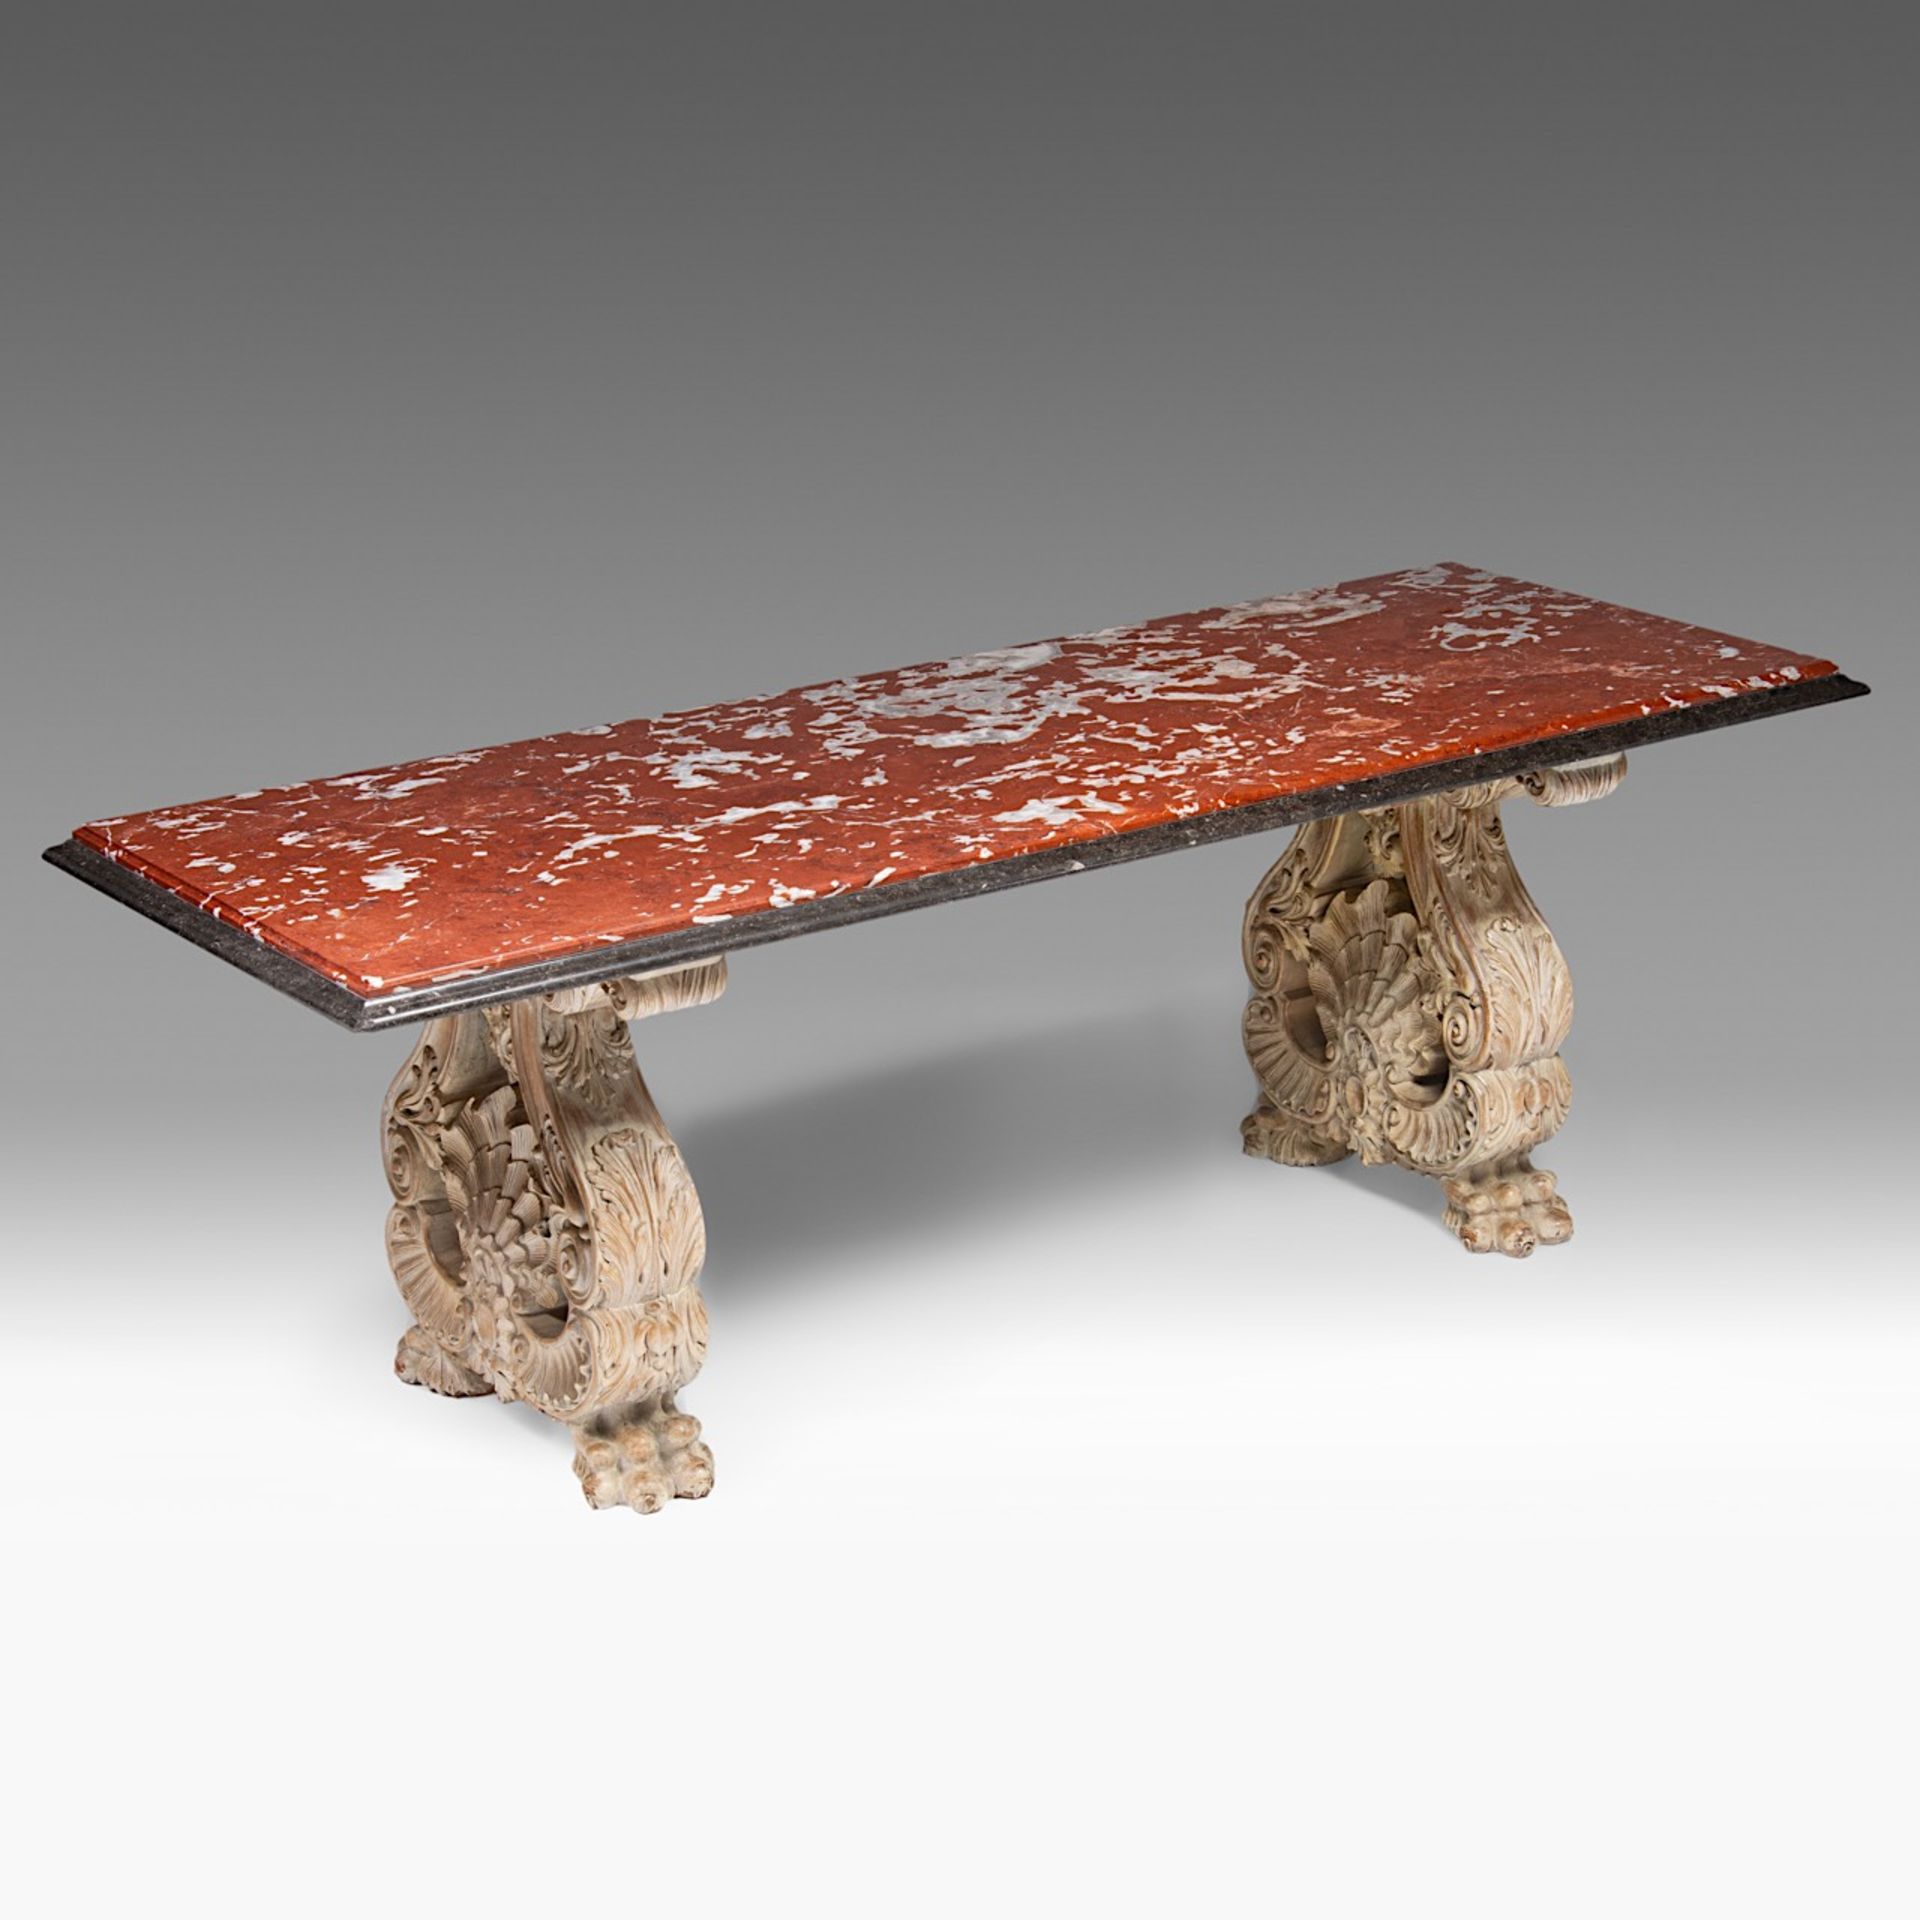 A Renaissance-style marble-topped table with sculpted wood trestles, H 76 cm - W 219 cm - D 84 cm - Image 4 of 6